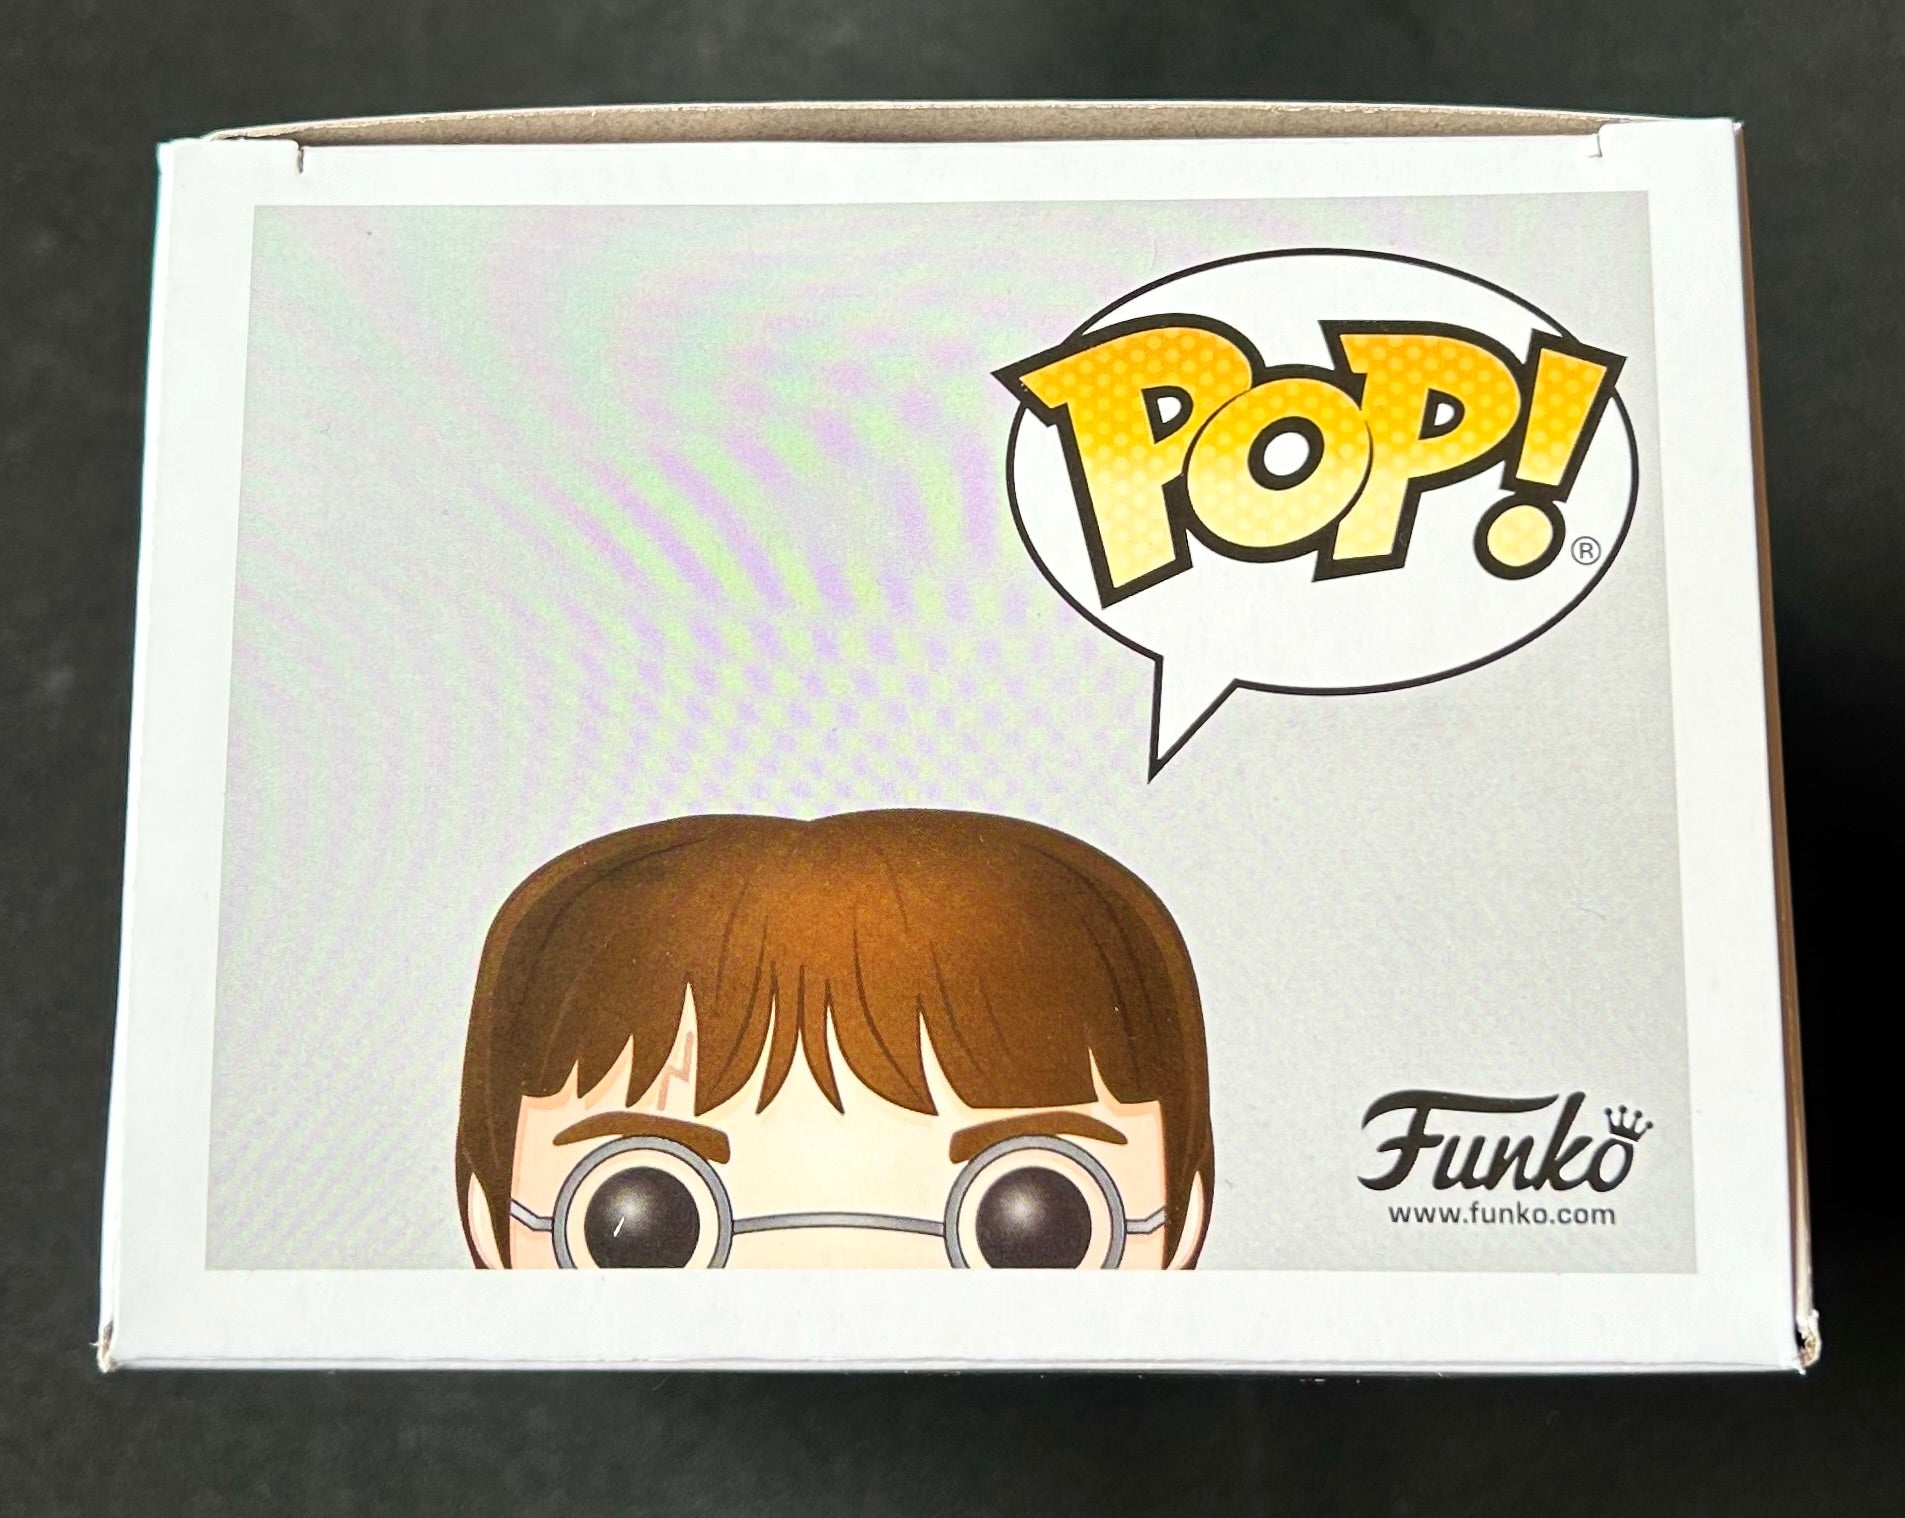 Harry Potter 01 Funko POP! with Hand Painted Sketch and Eclectic Double Layer Authenticity